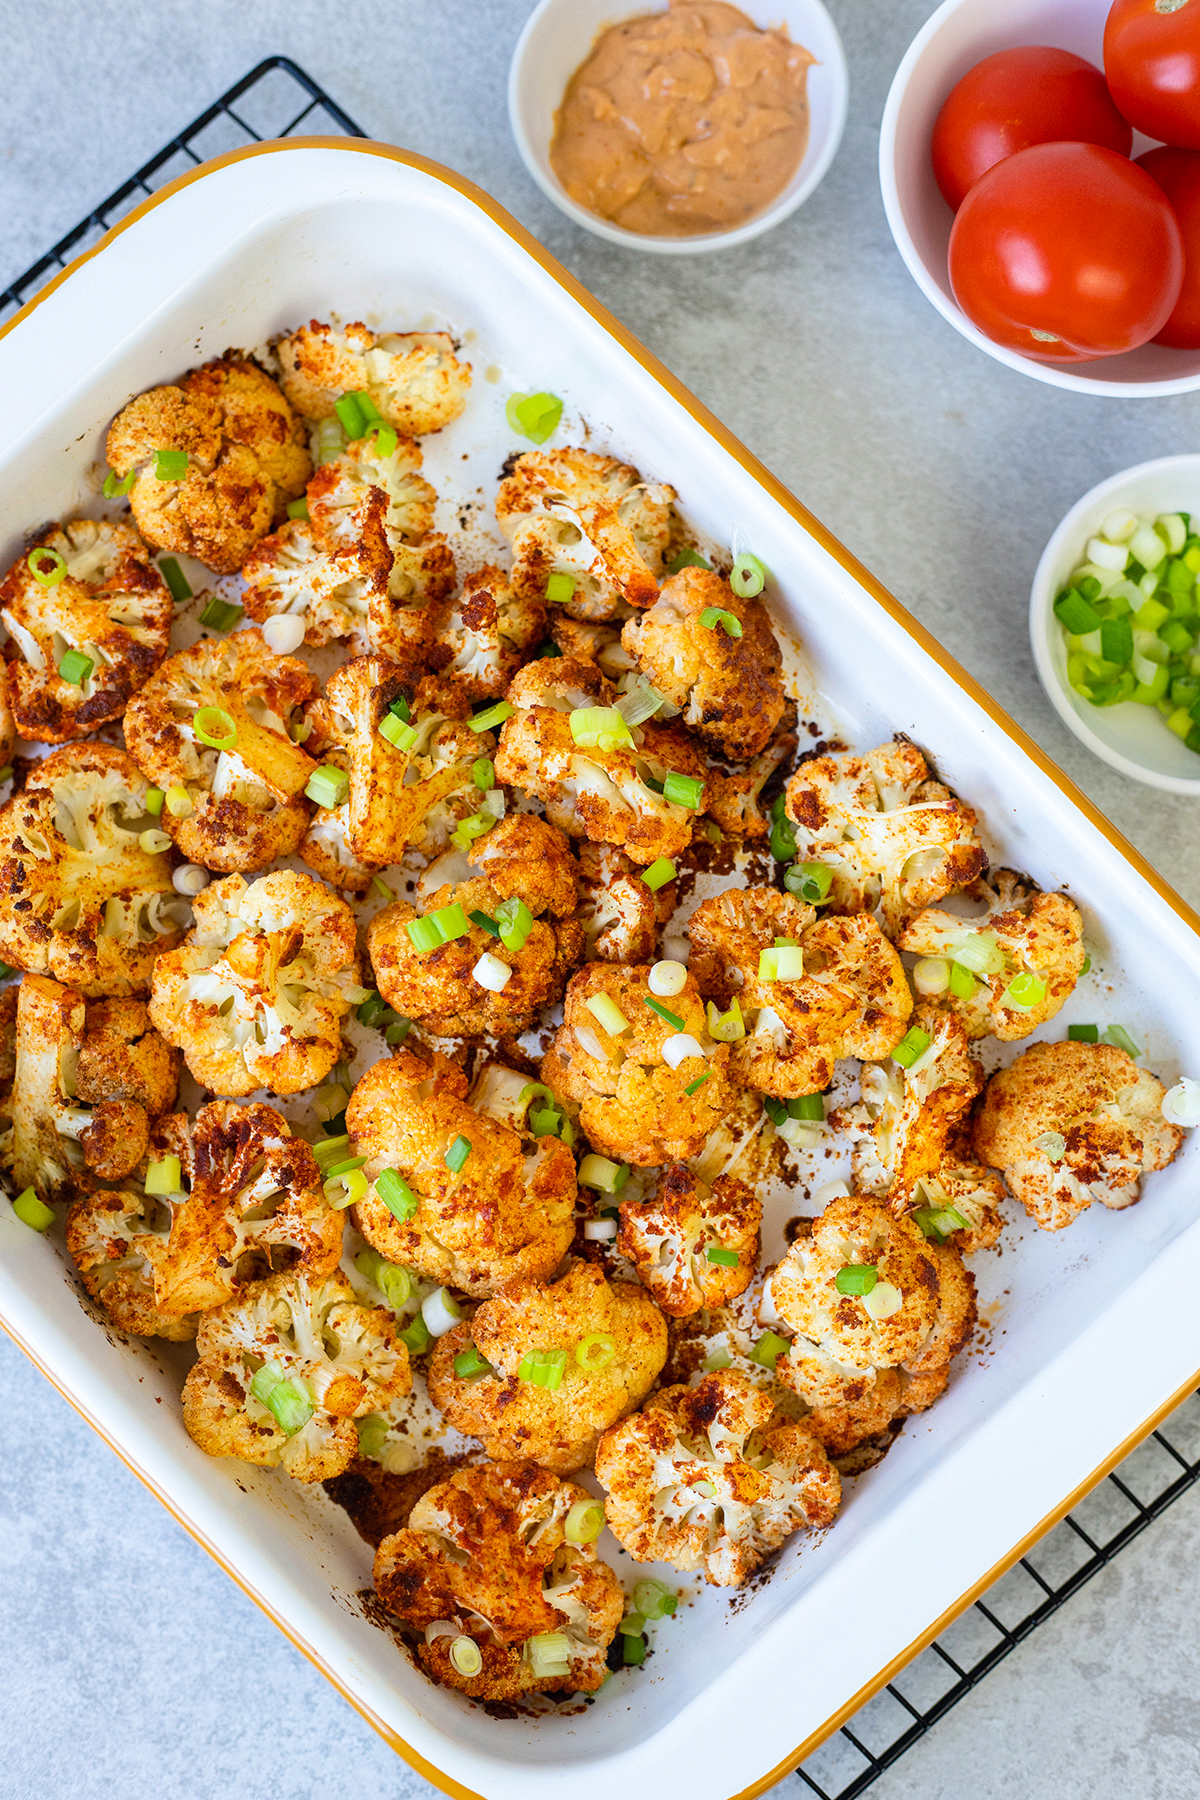 Spicy roasted cauliflower topped with green onion garnish in white casserole dish.